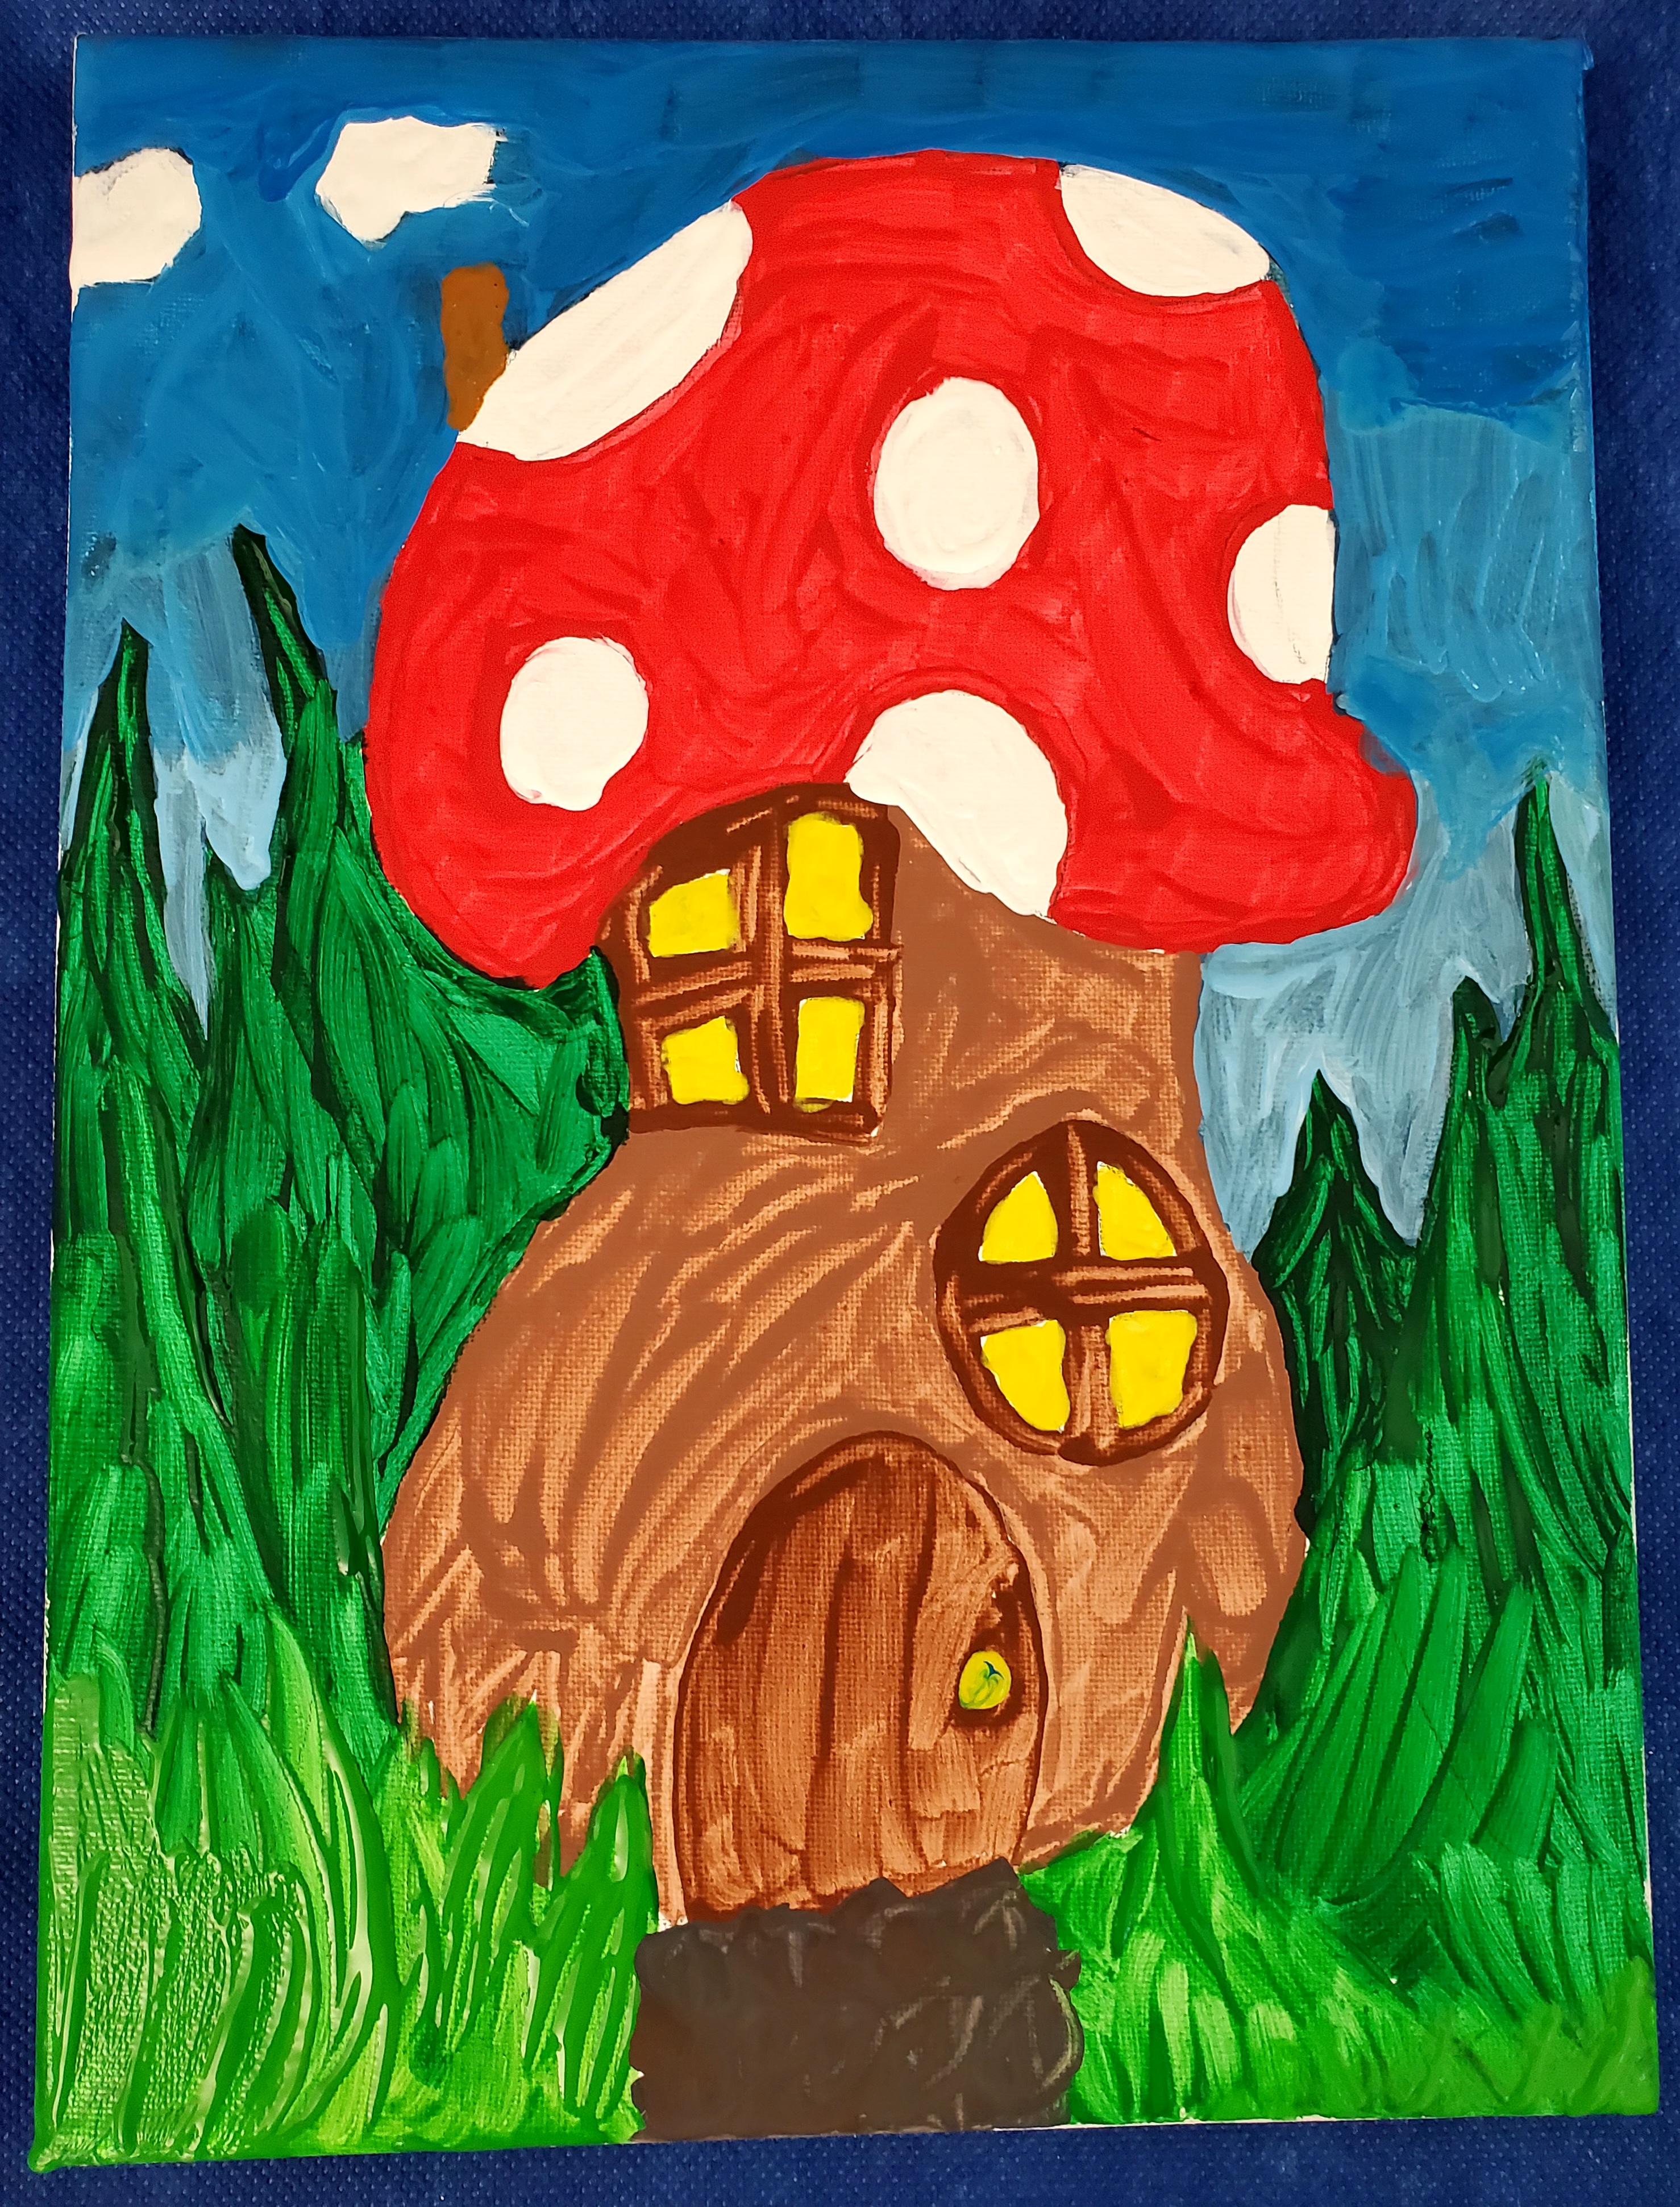 A mushroom house with a red roof with white spots, a brown chimney with white puffs of smoke coming out of it, and a brown mushroom base with two windows with light shining and a door with a yellow doorknob. The house is surrounded by different shades of blue sky and various shades of green grass.